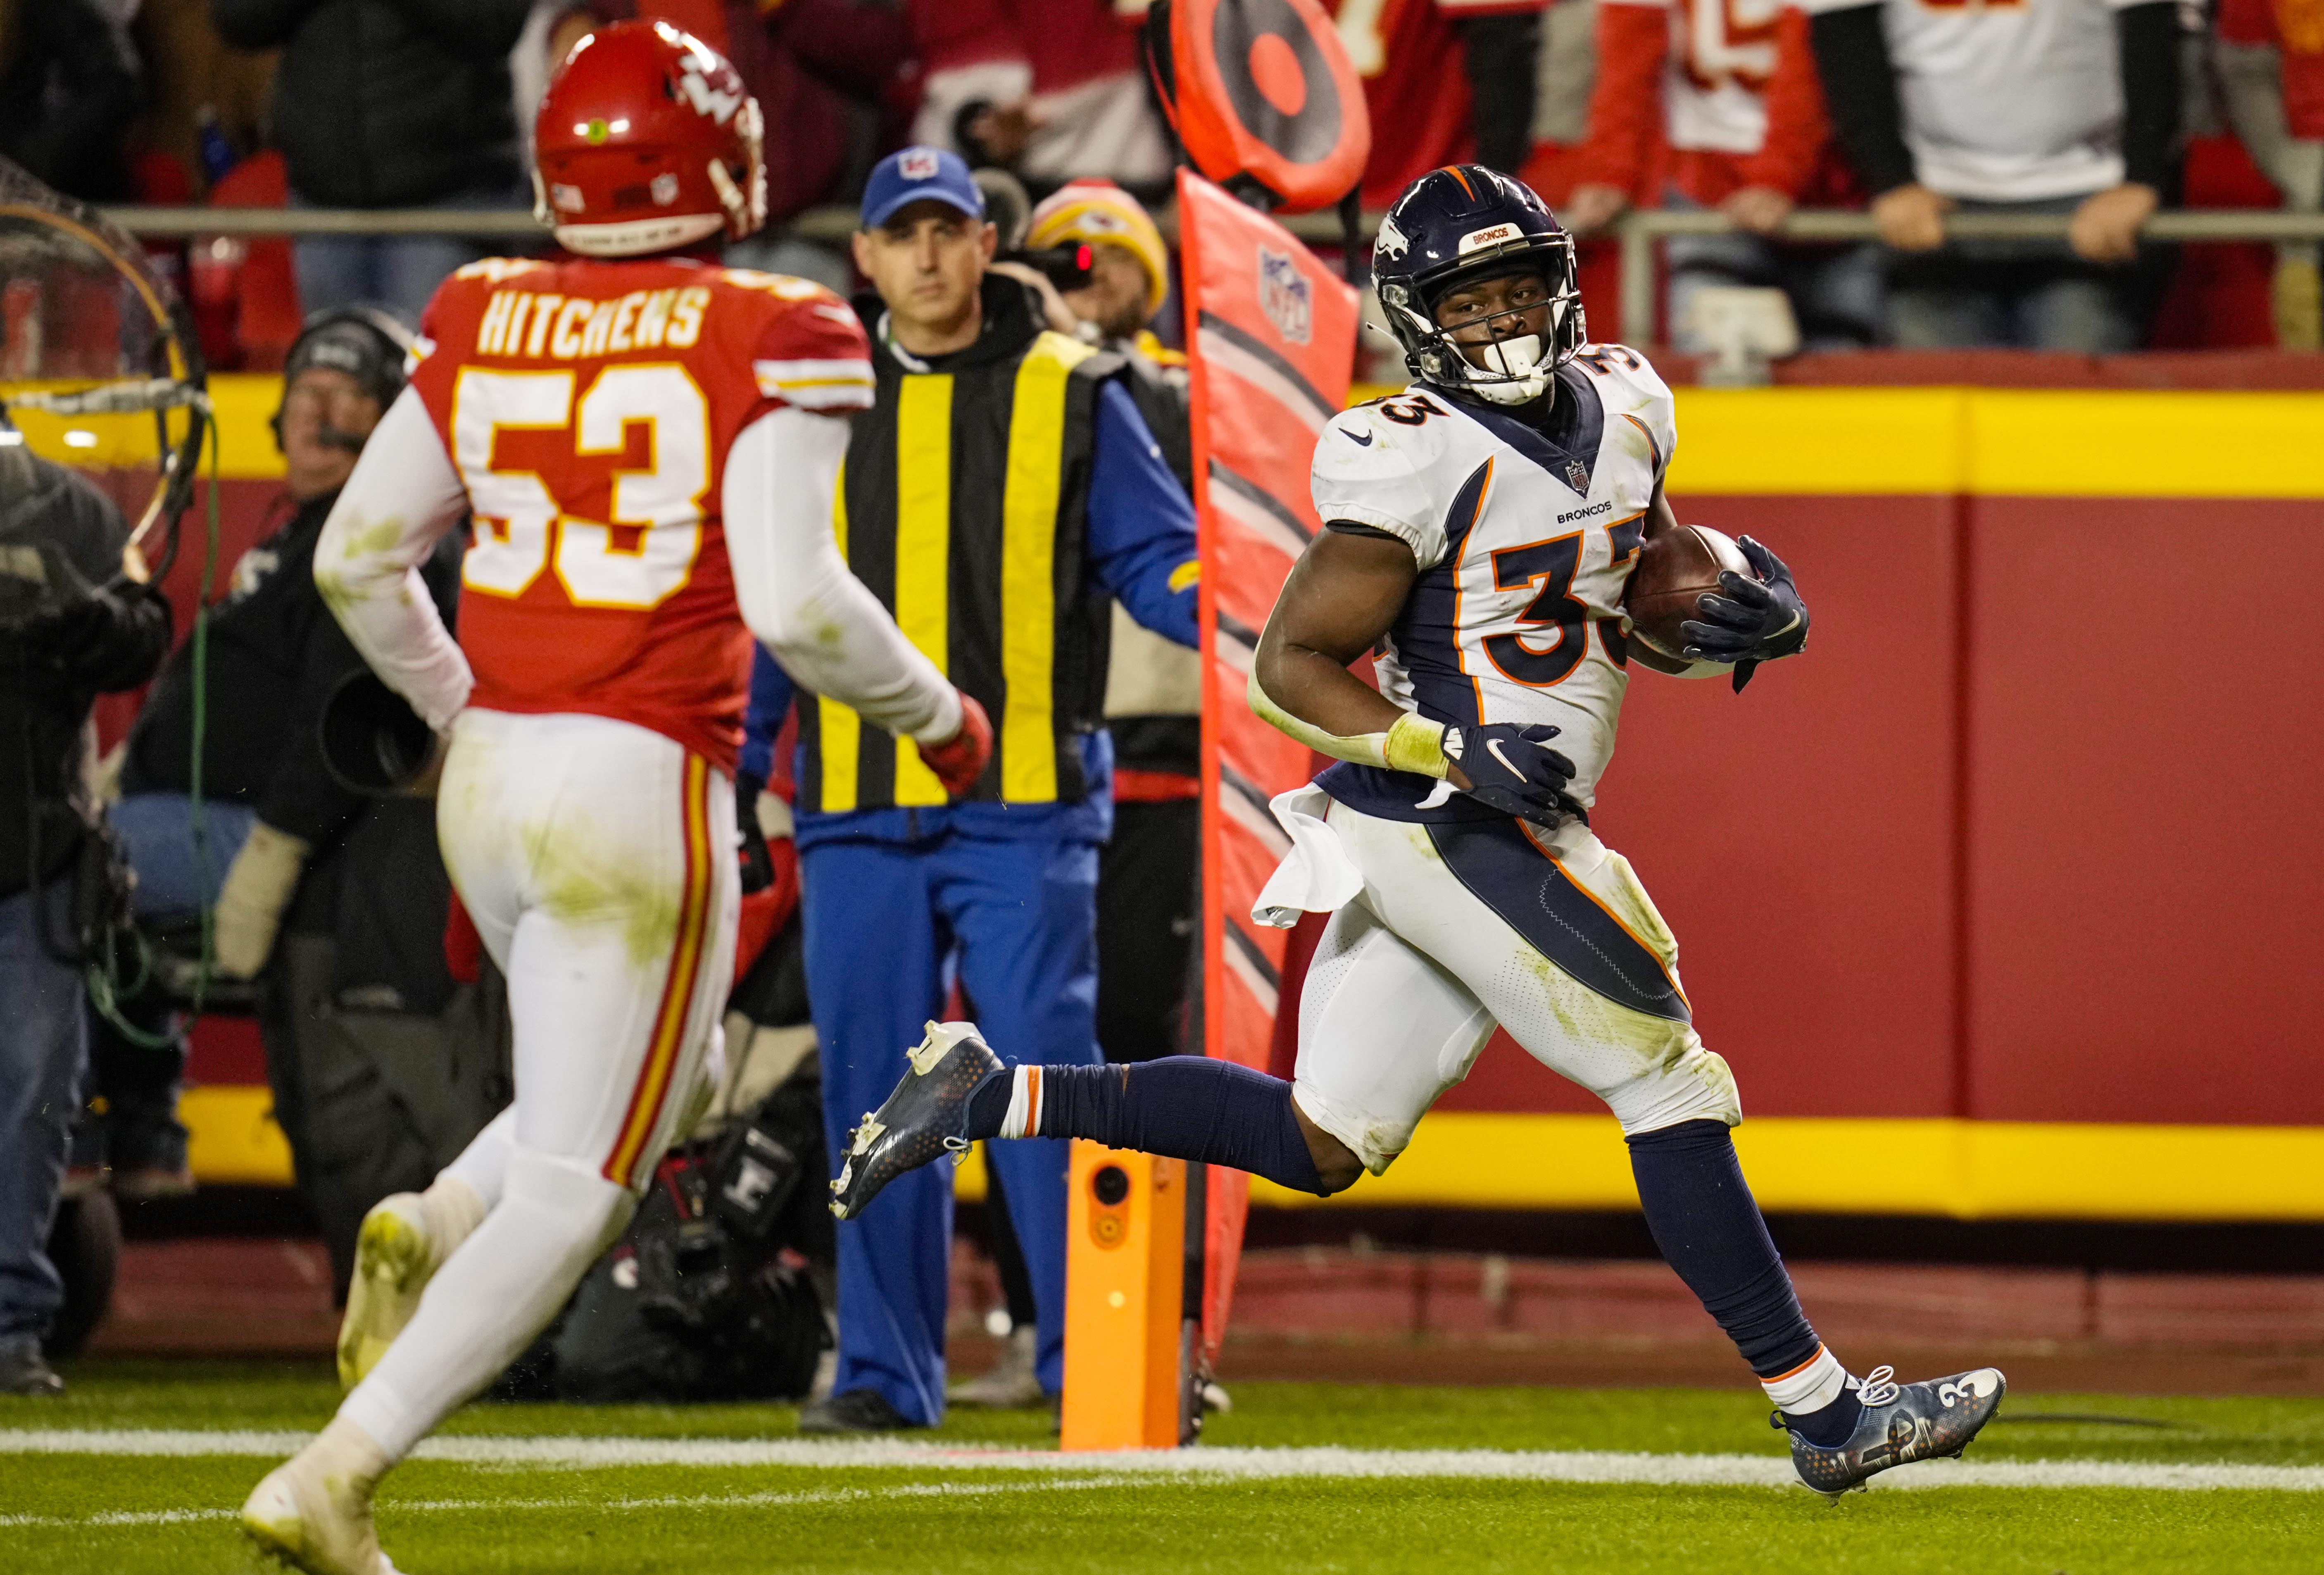 Denver Broncos star running back Javonte Williams (33) runs for a touchdown as Kansas City Chiefs linebacker Anthony Hitchens (53) defends during the second half at GEHA Field at Arrowhead Stadium.